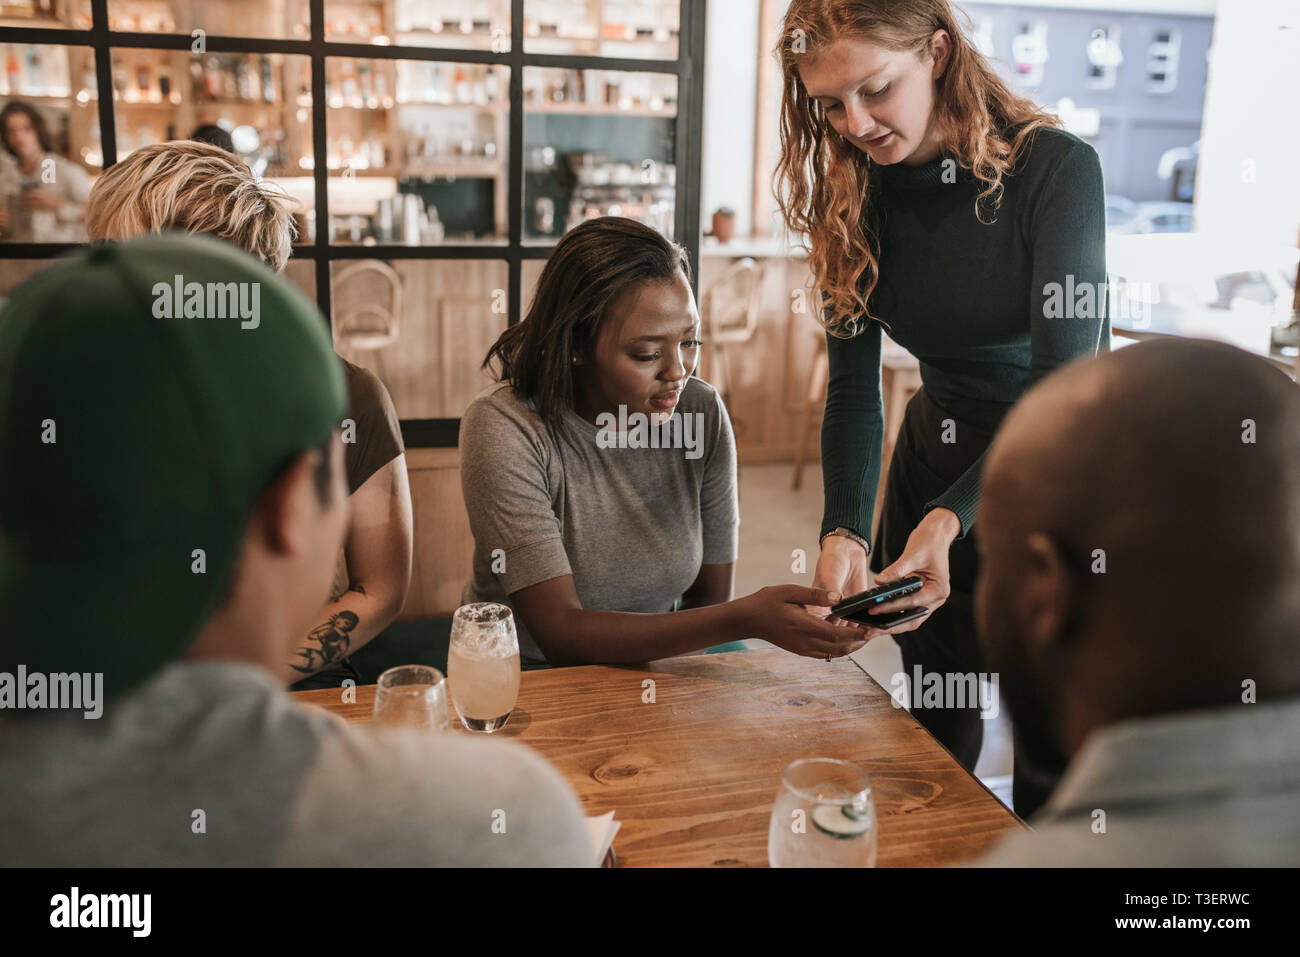 Customer paying a restaurant bill with her smartphone Stock Photo